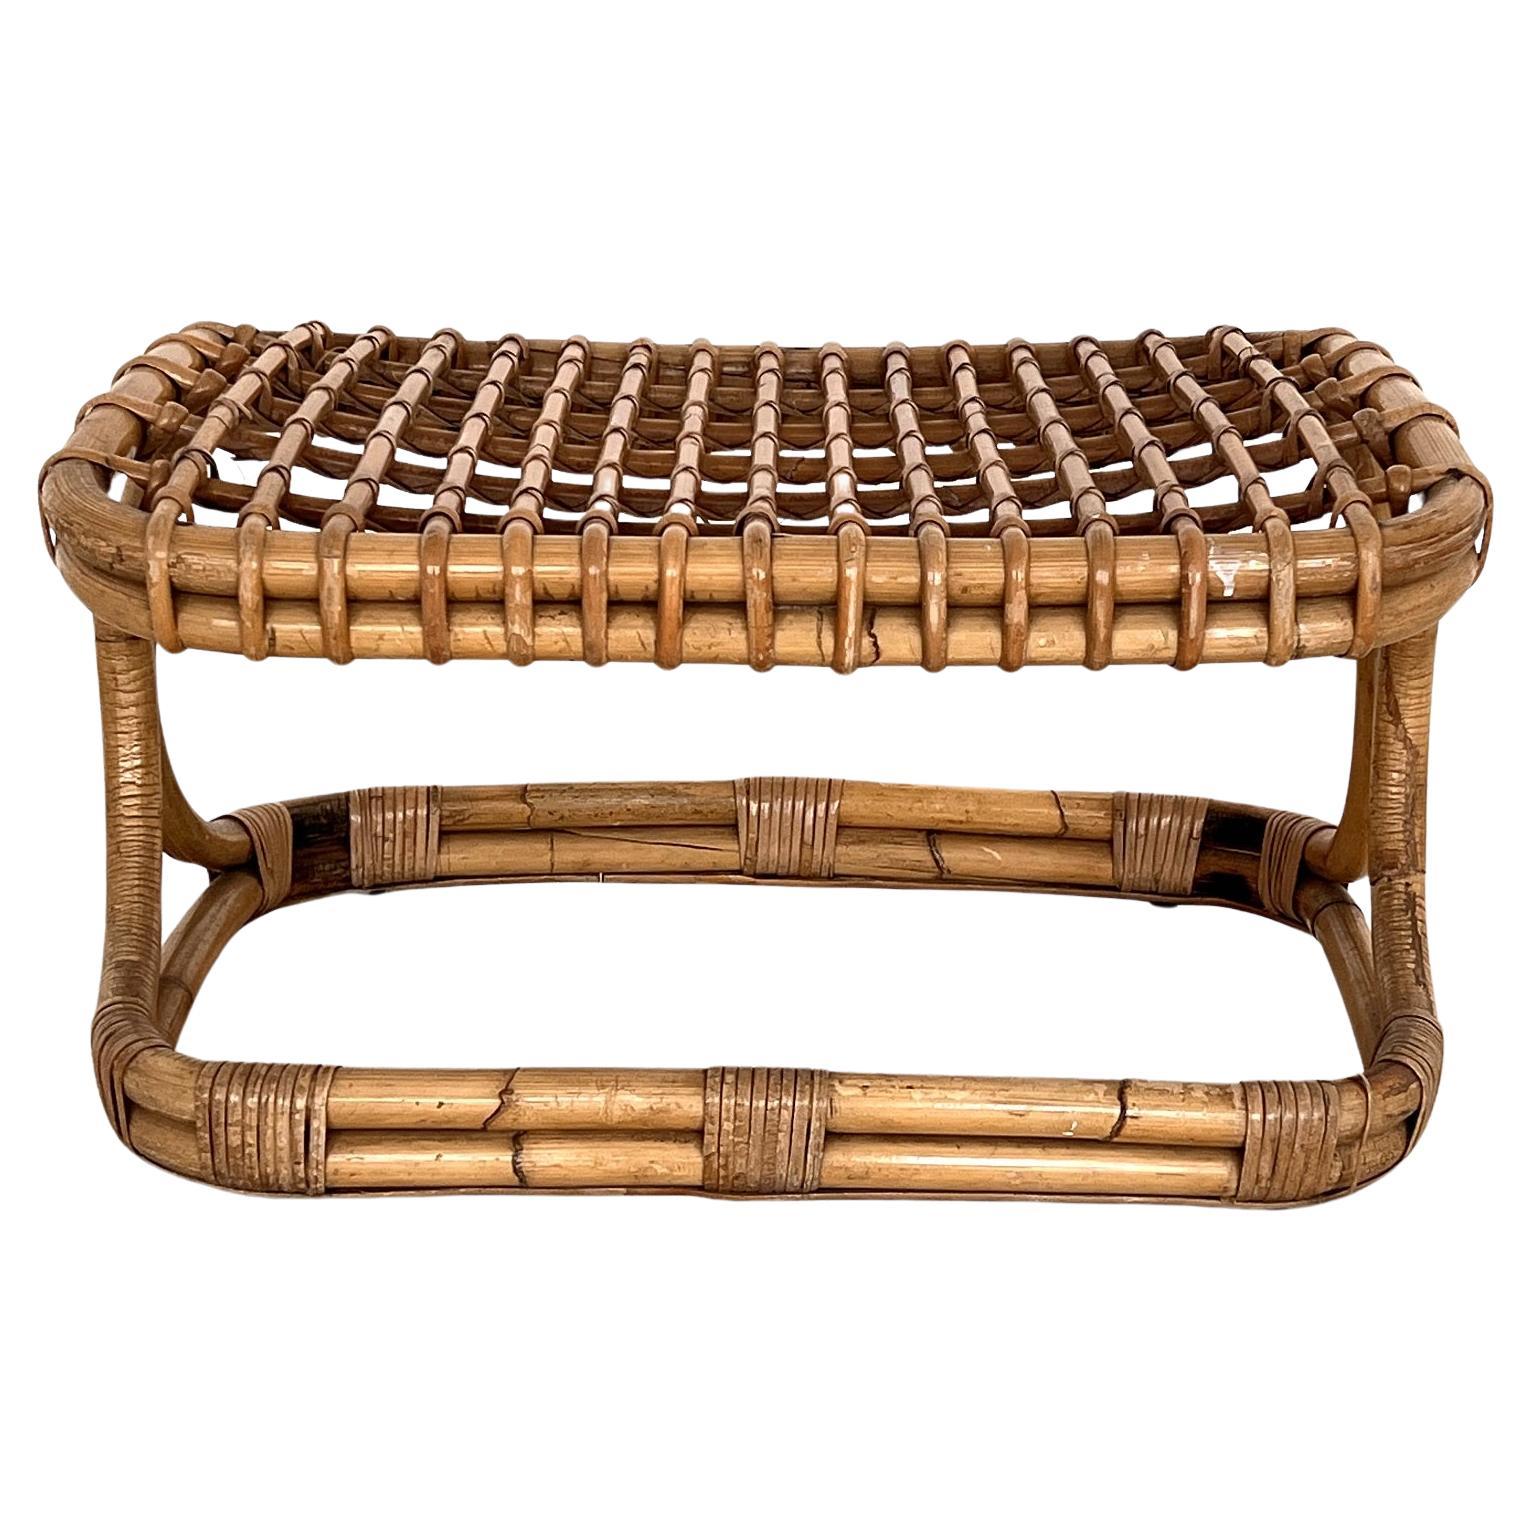 Italian Midcentury Stool in Bamboo Rattan by Tito Agnoli, 1960s For Sale